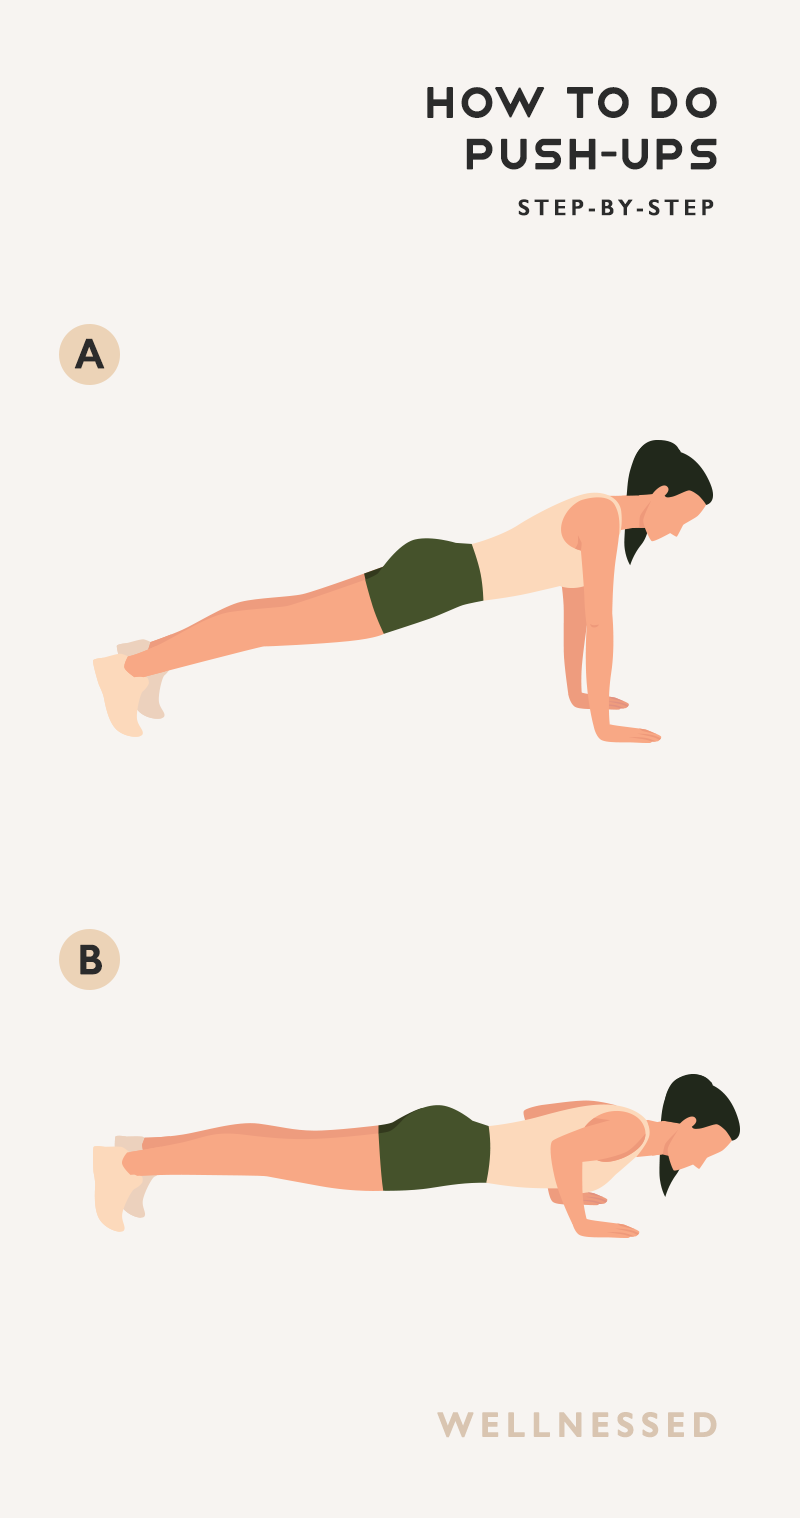 Step-by-step illlustration of how to do a push-up